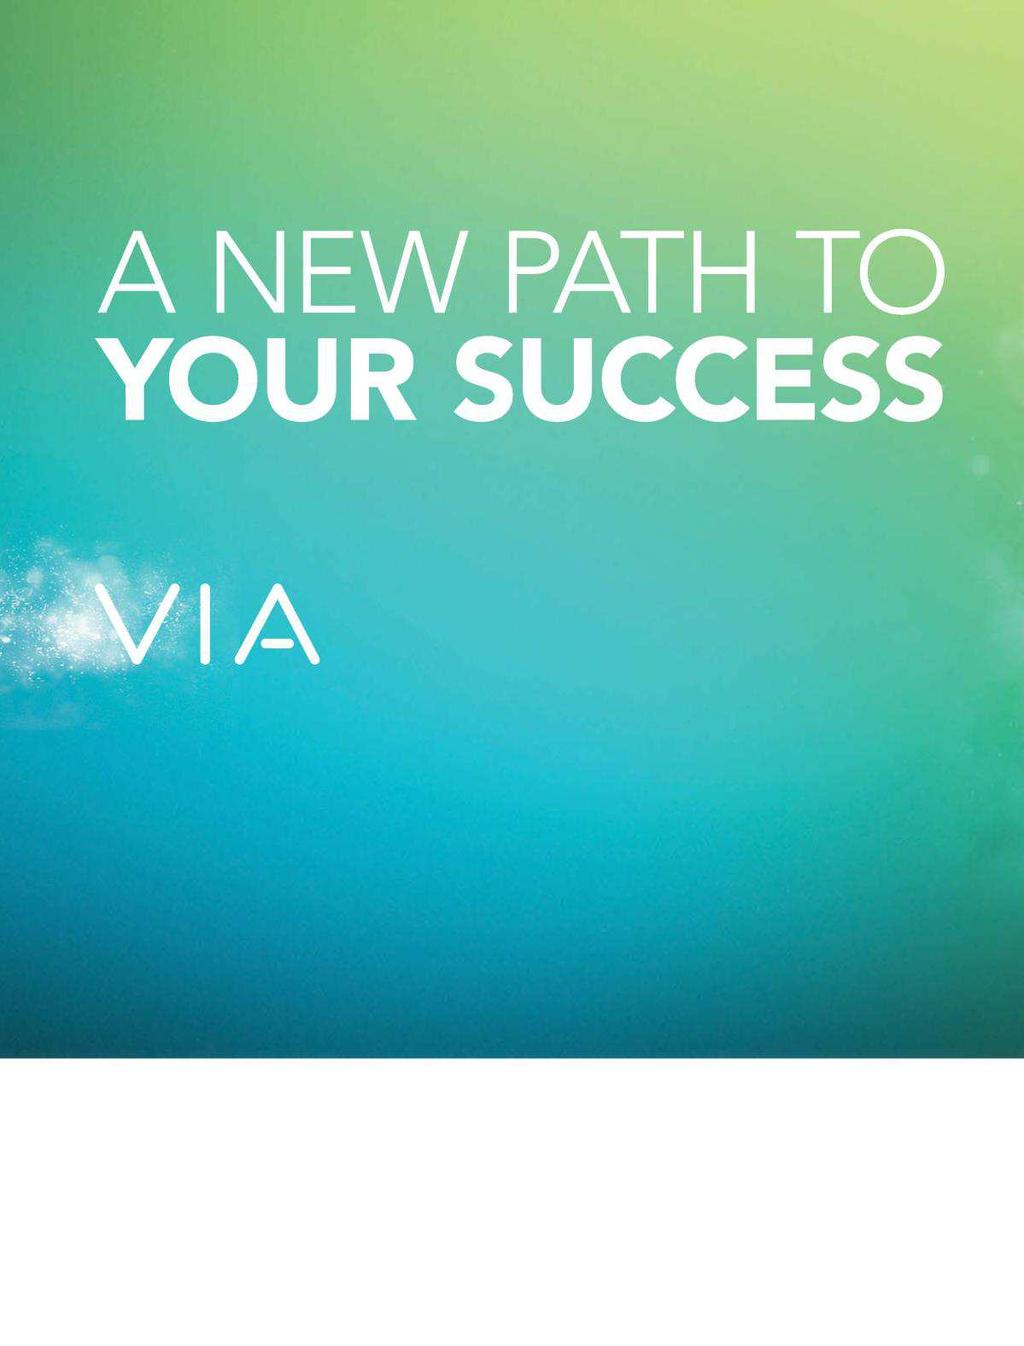 HUMAN DATA SCIENCE Research & Development Real-World Value & Outcomes IMS Health and Quintiles are now IQVIA created to advance your pursuits of